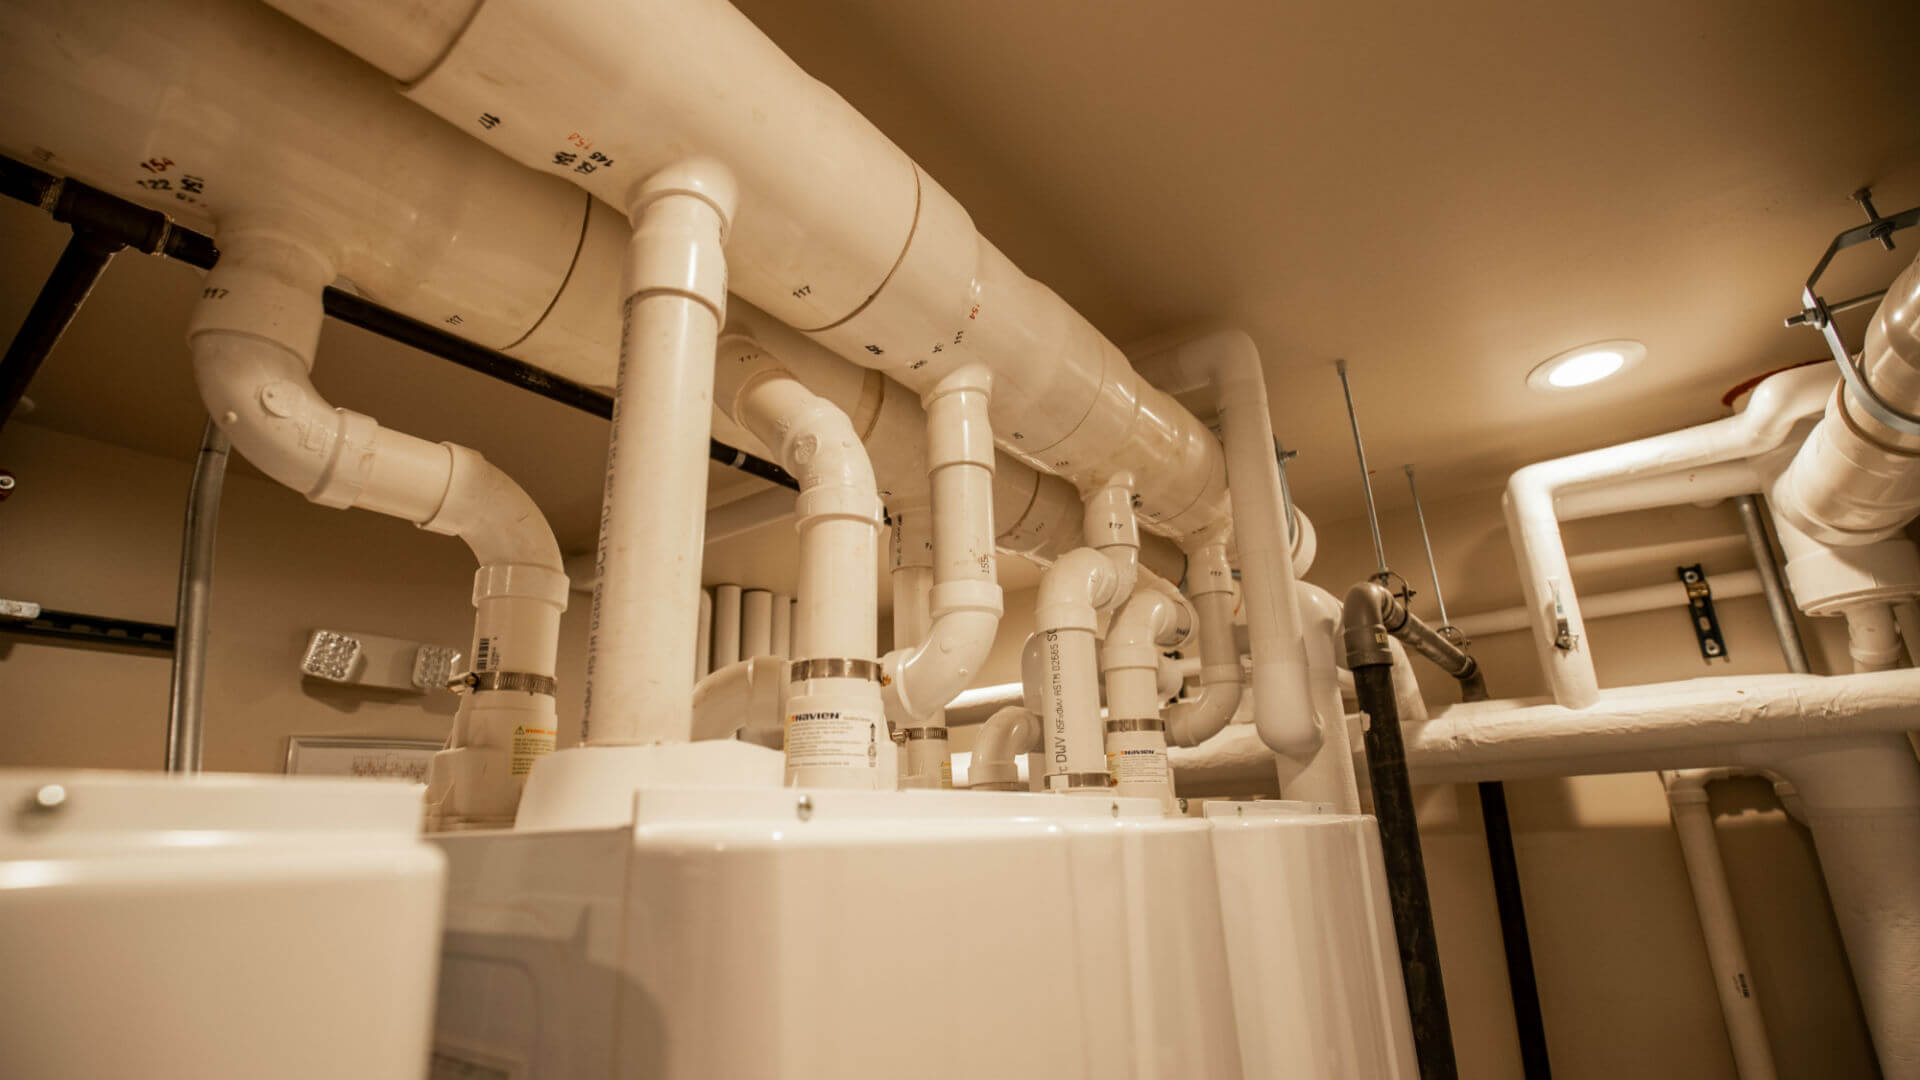 Hometown Plumbing and Heating Quad Cities Iowa Projects Park Vista Retirement Living plumbing pipes